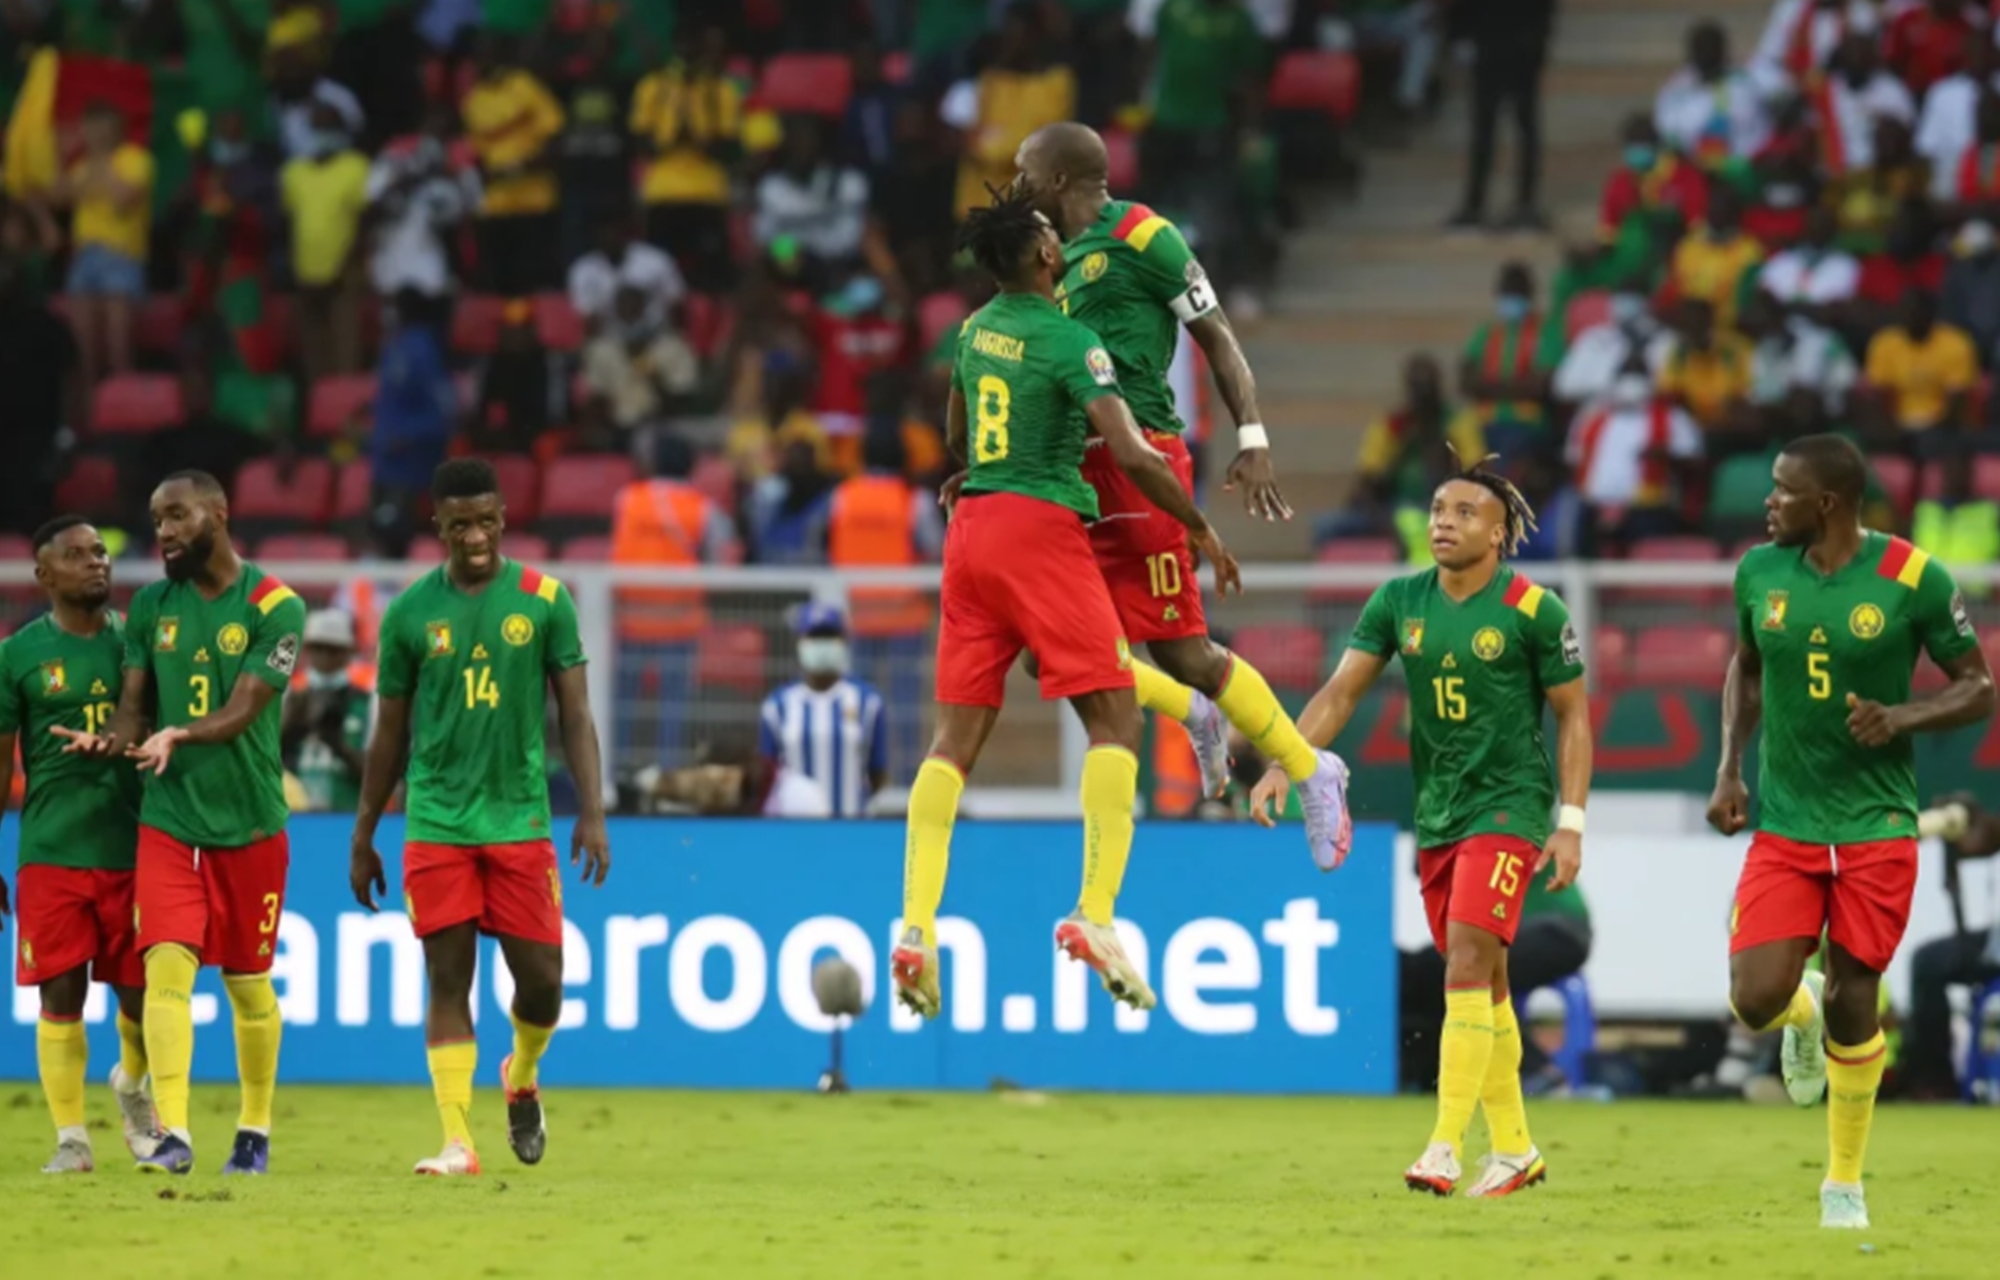  AFCON 2021 Opener: Vincent Aboubakar guides Cameroon to beat Burkina Faso